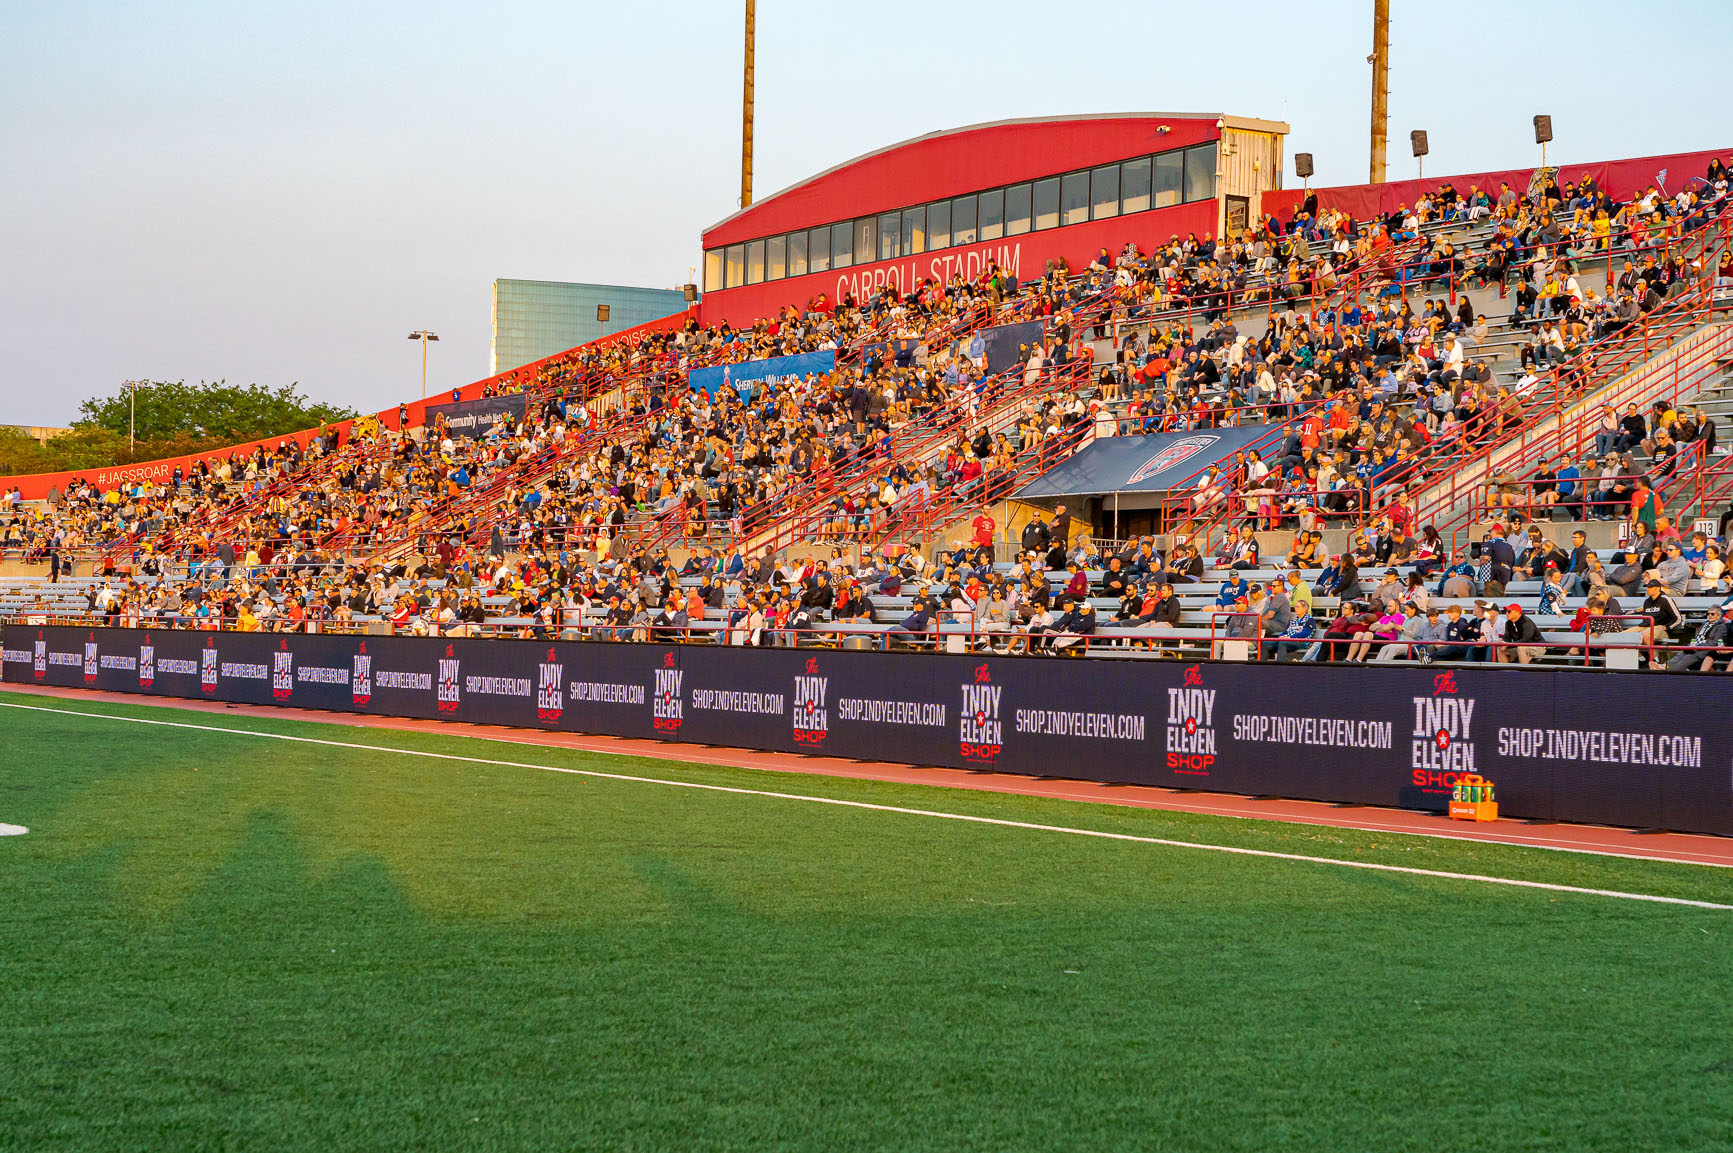 Carroll Stadium  Know Before You Go! - Indy Eleven